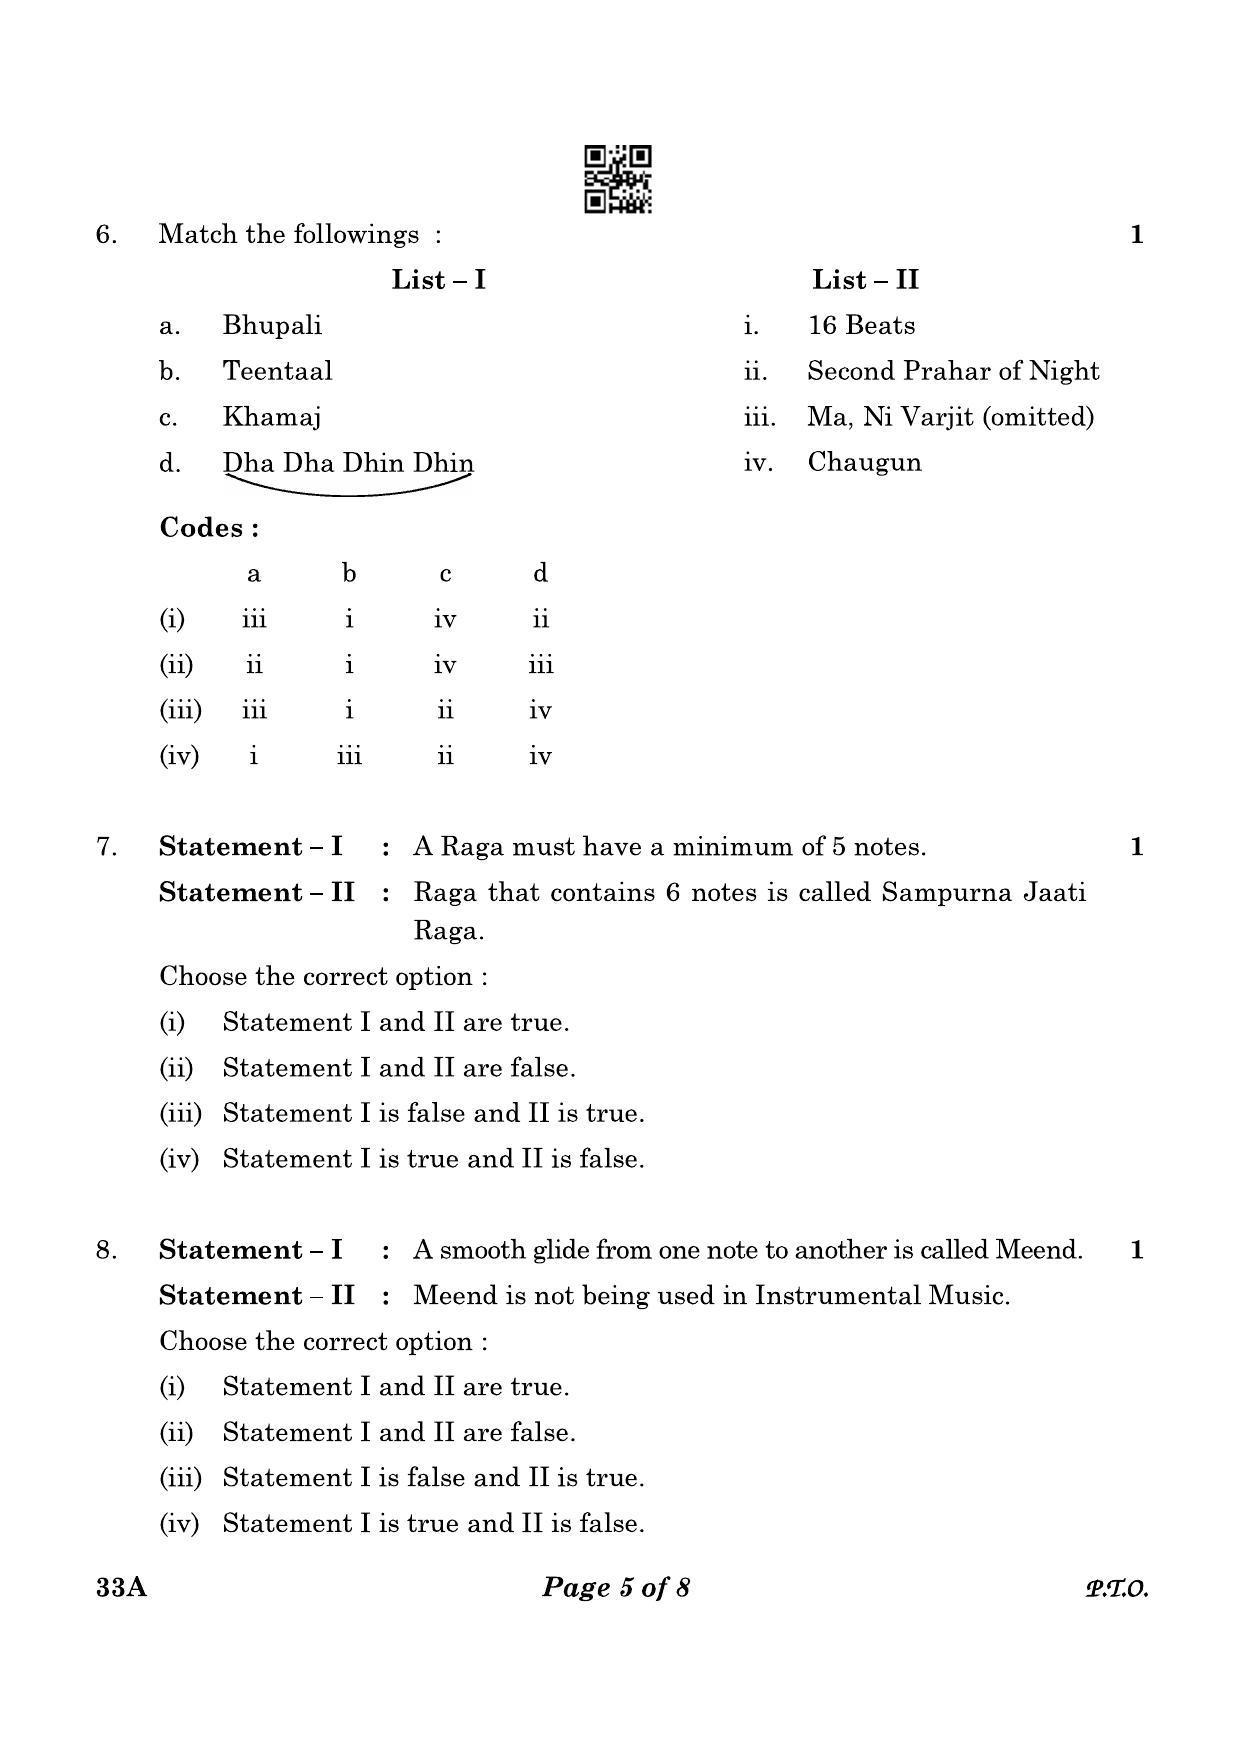 CBSE Class 10 33A Hindustani Music (MI) 2023 Question Paper - Page 5